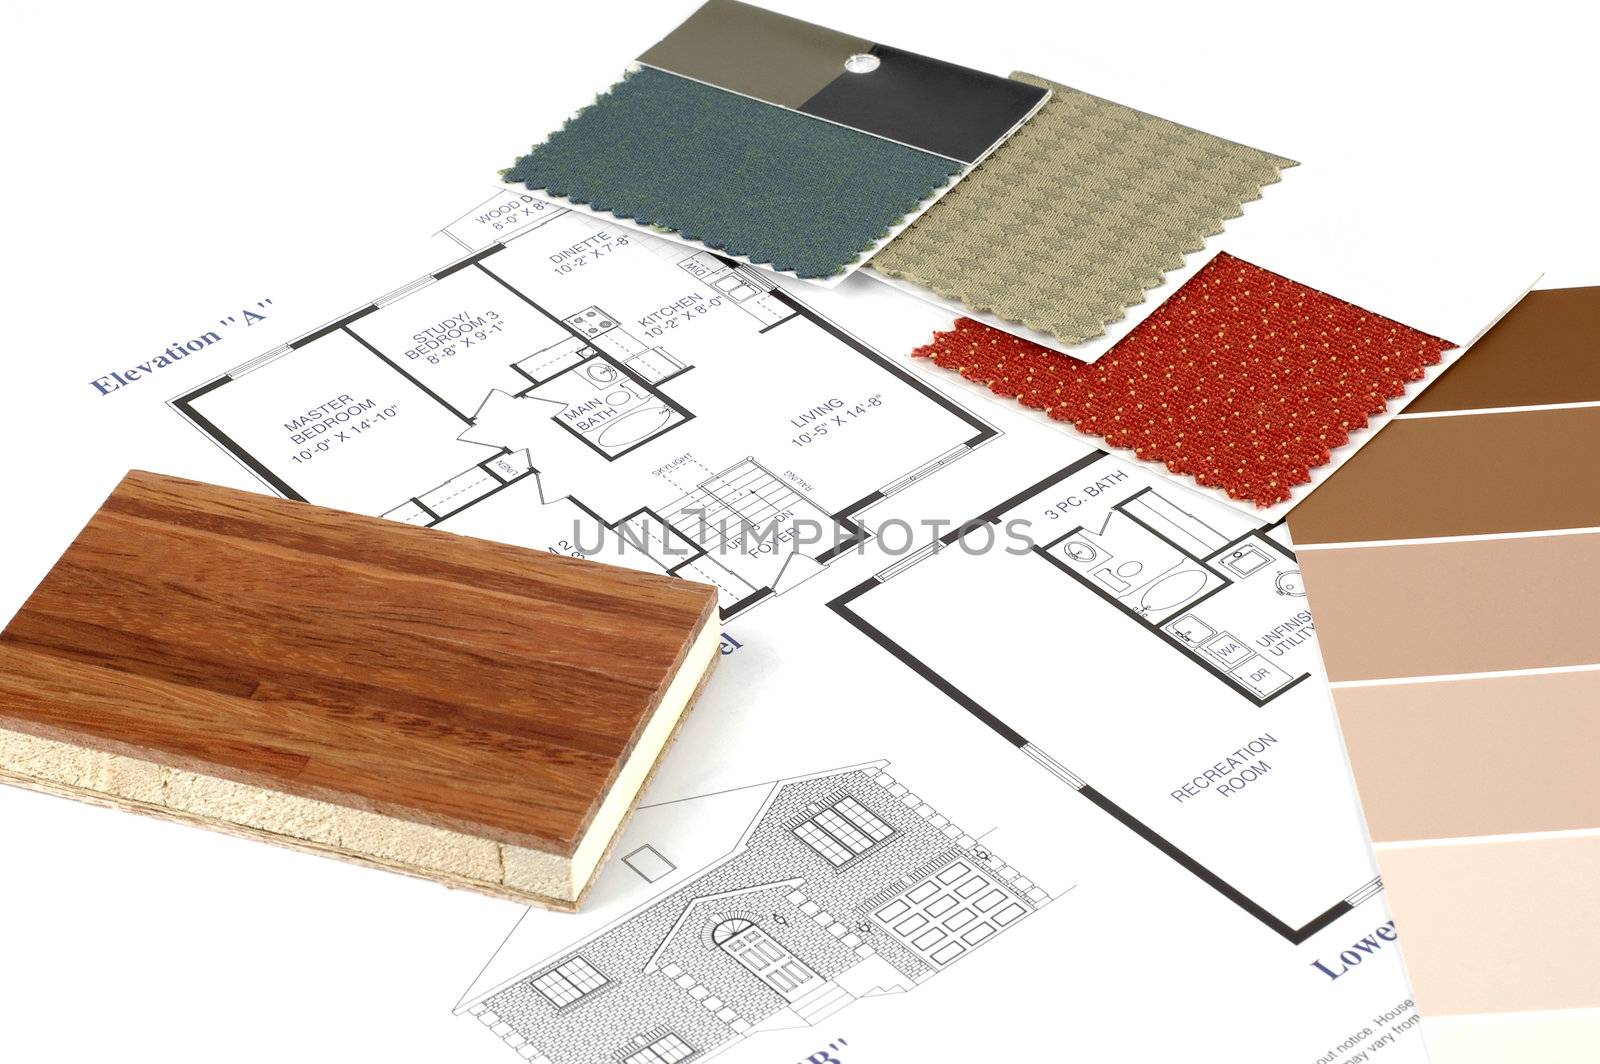 Home plans and decorating samples on a white background.